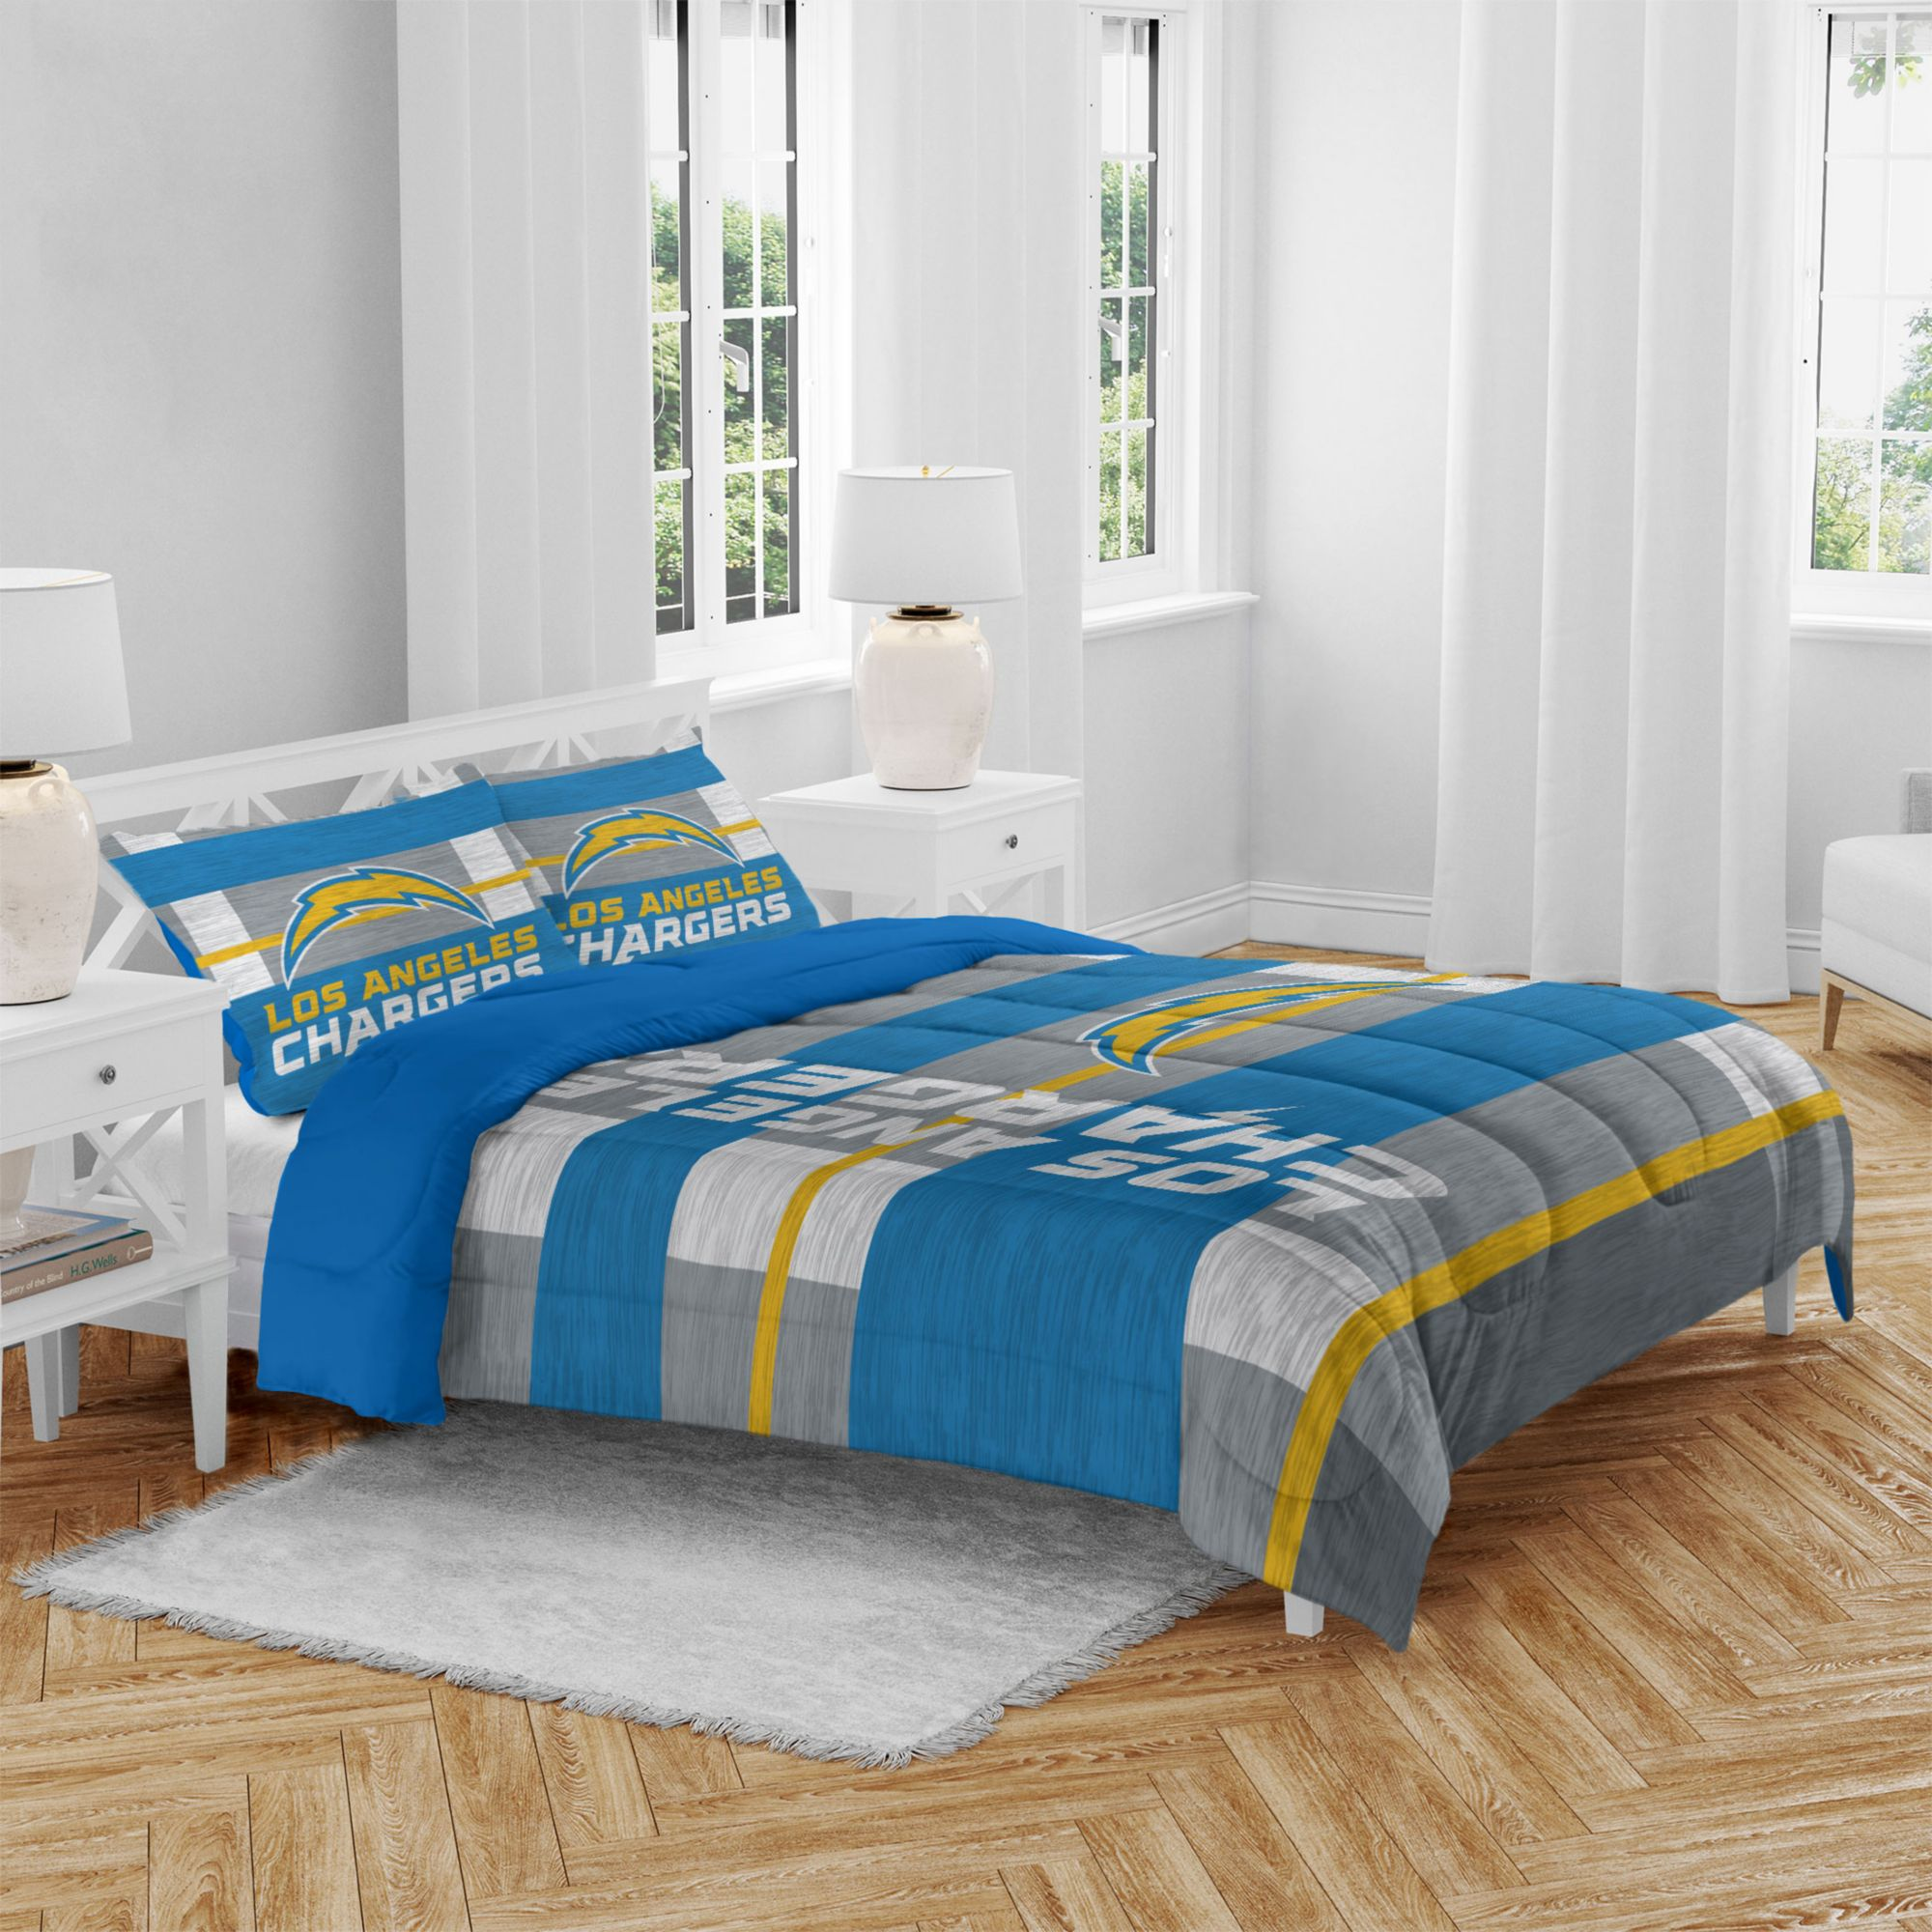 Pegasus Sports Los Angeles Chargers 3-Piece Queen Bedding Set, Team